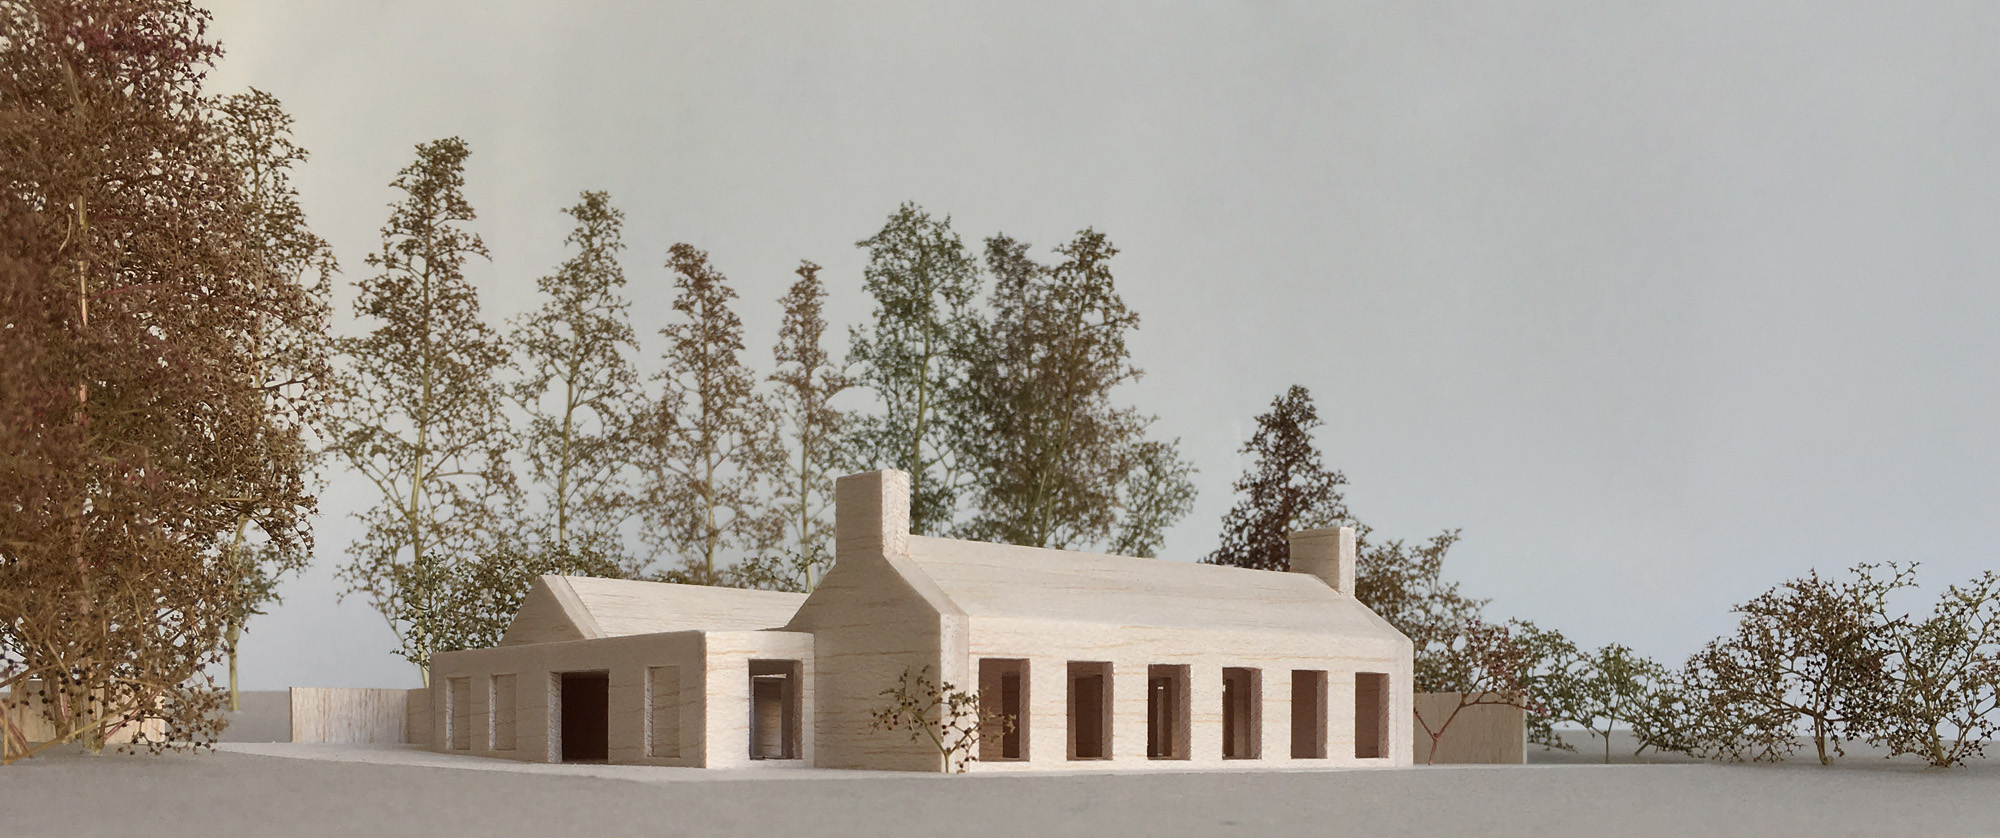 Erbar Mattes Architects Norfolk Country House model 2